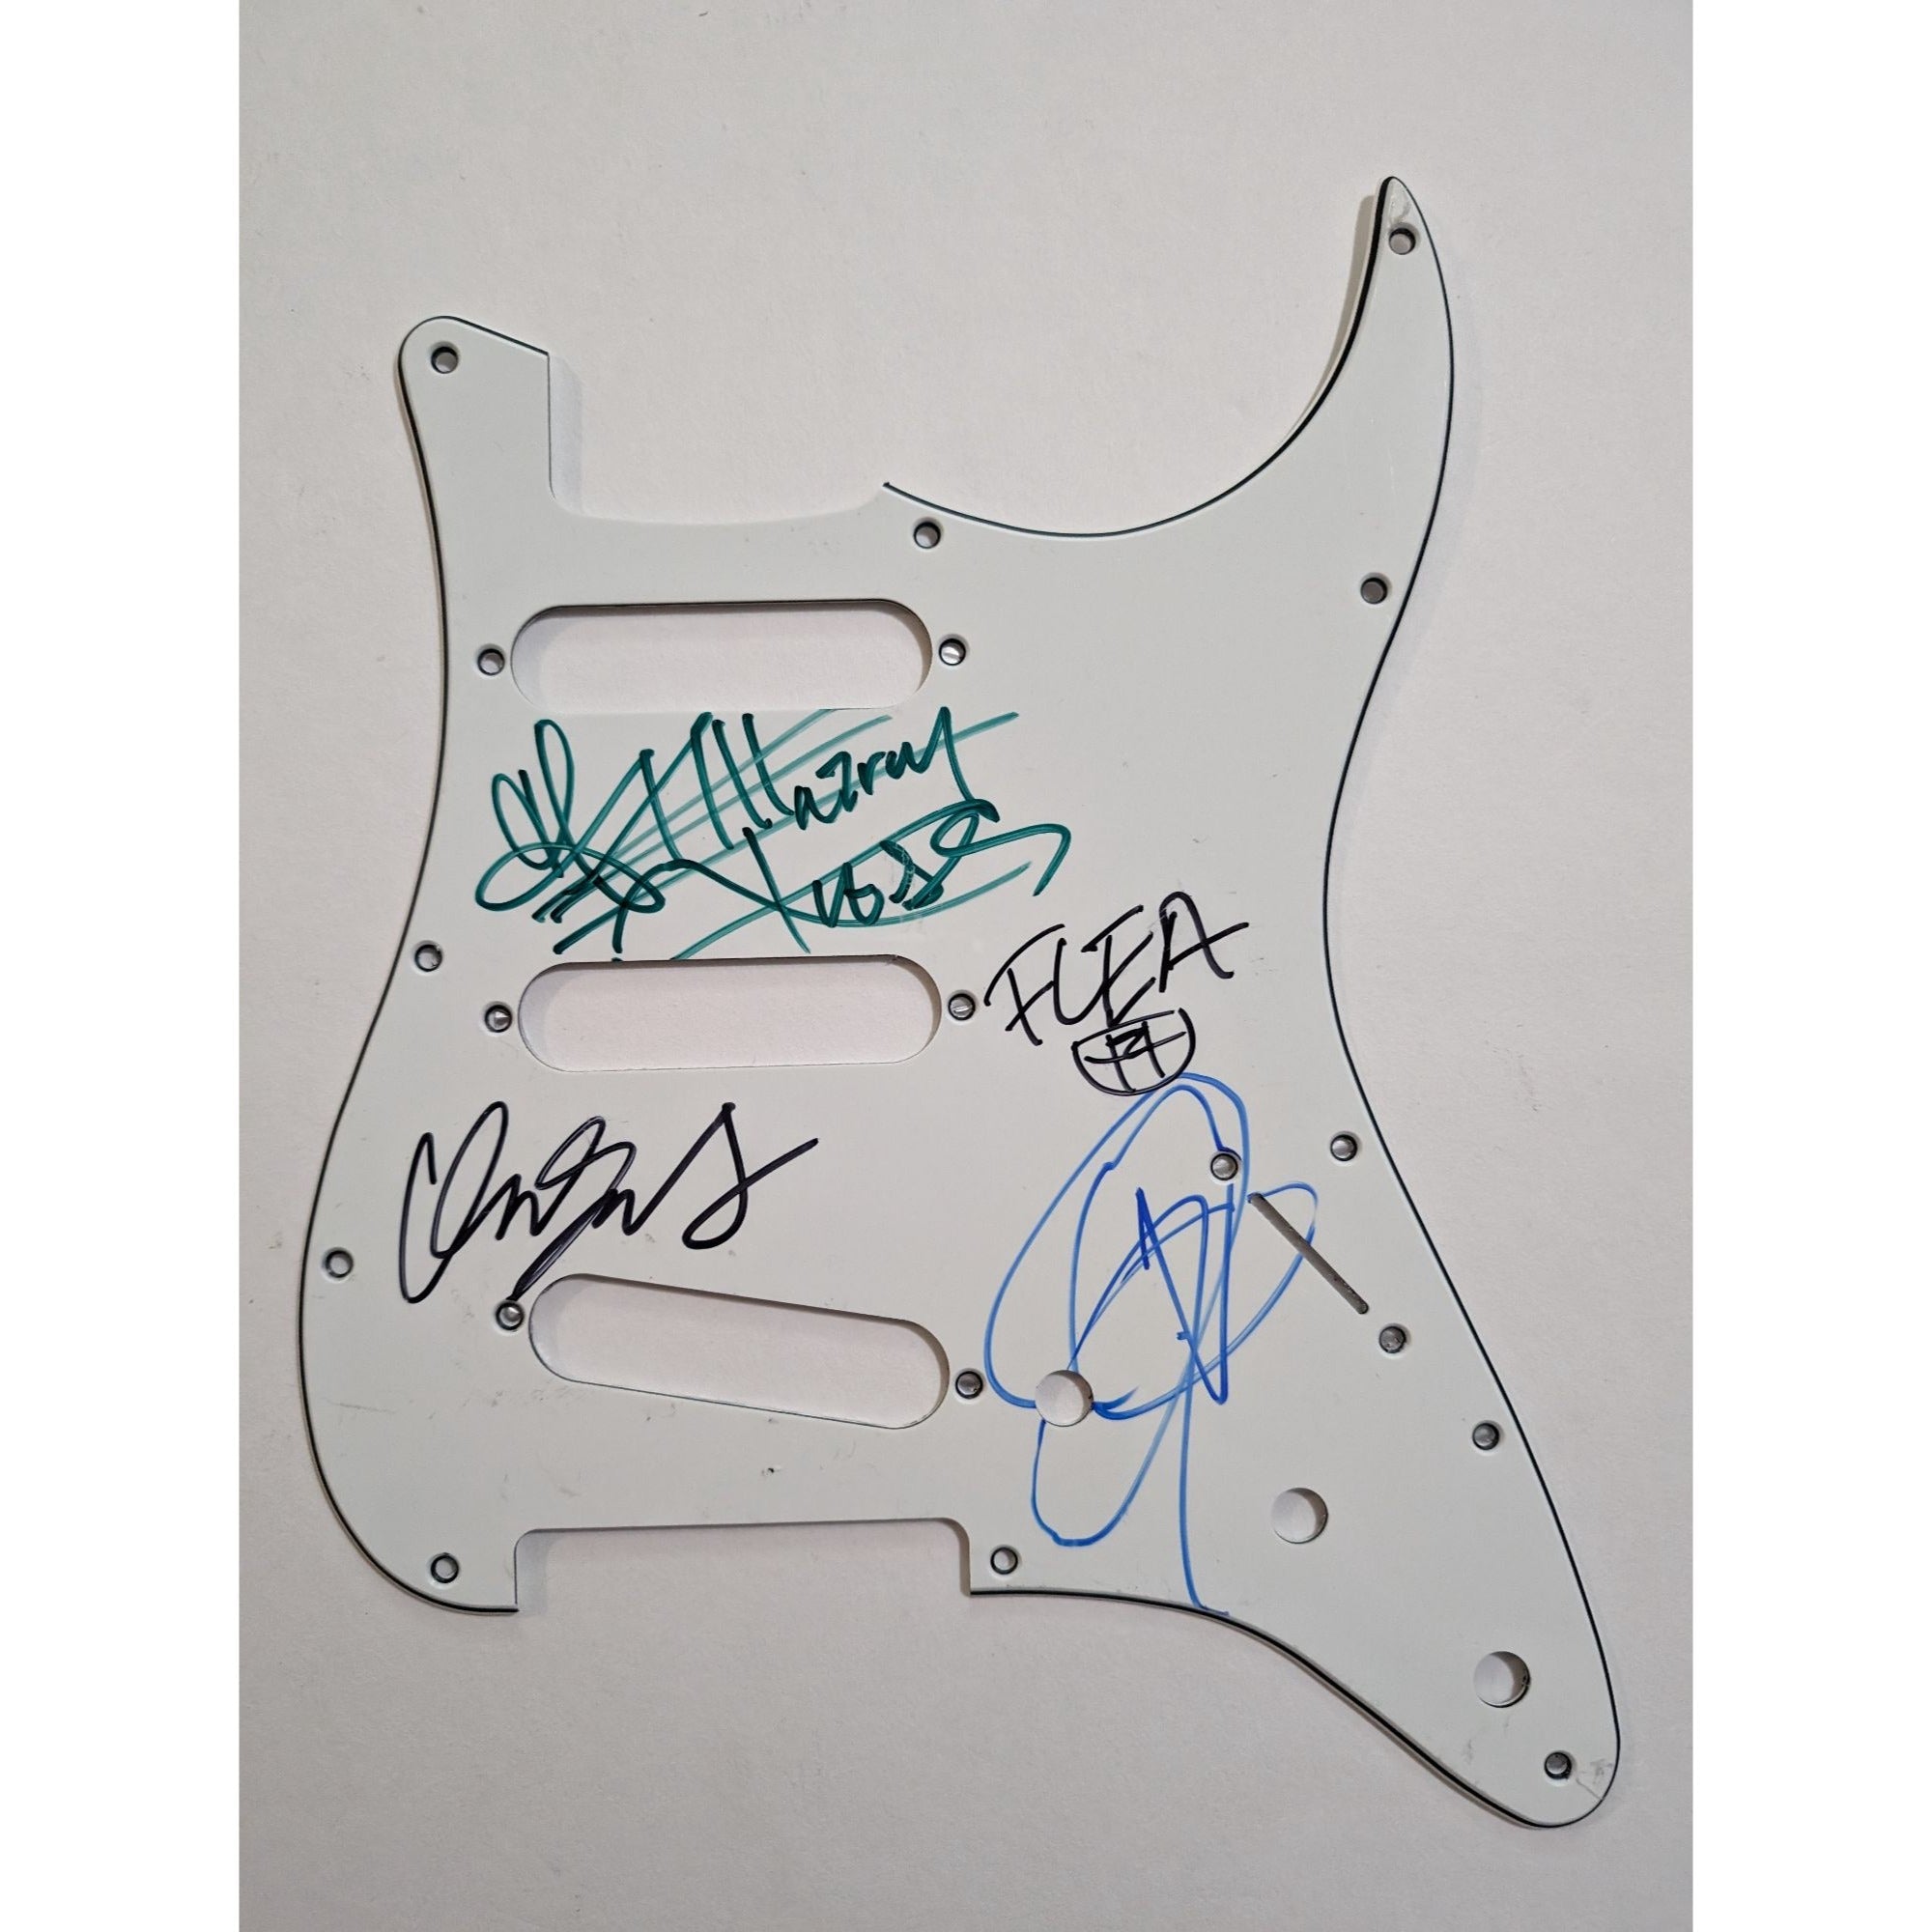 Red Hot Peppers Anthony Kiedis, Flea, Chad Smith, John Frusciante  Fender Stratocaster electric guitar pick guard signed with proof